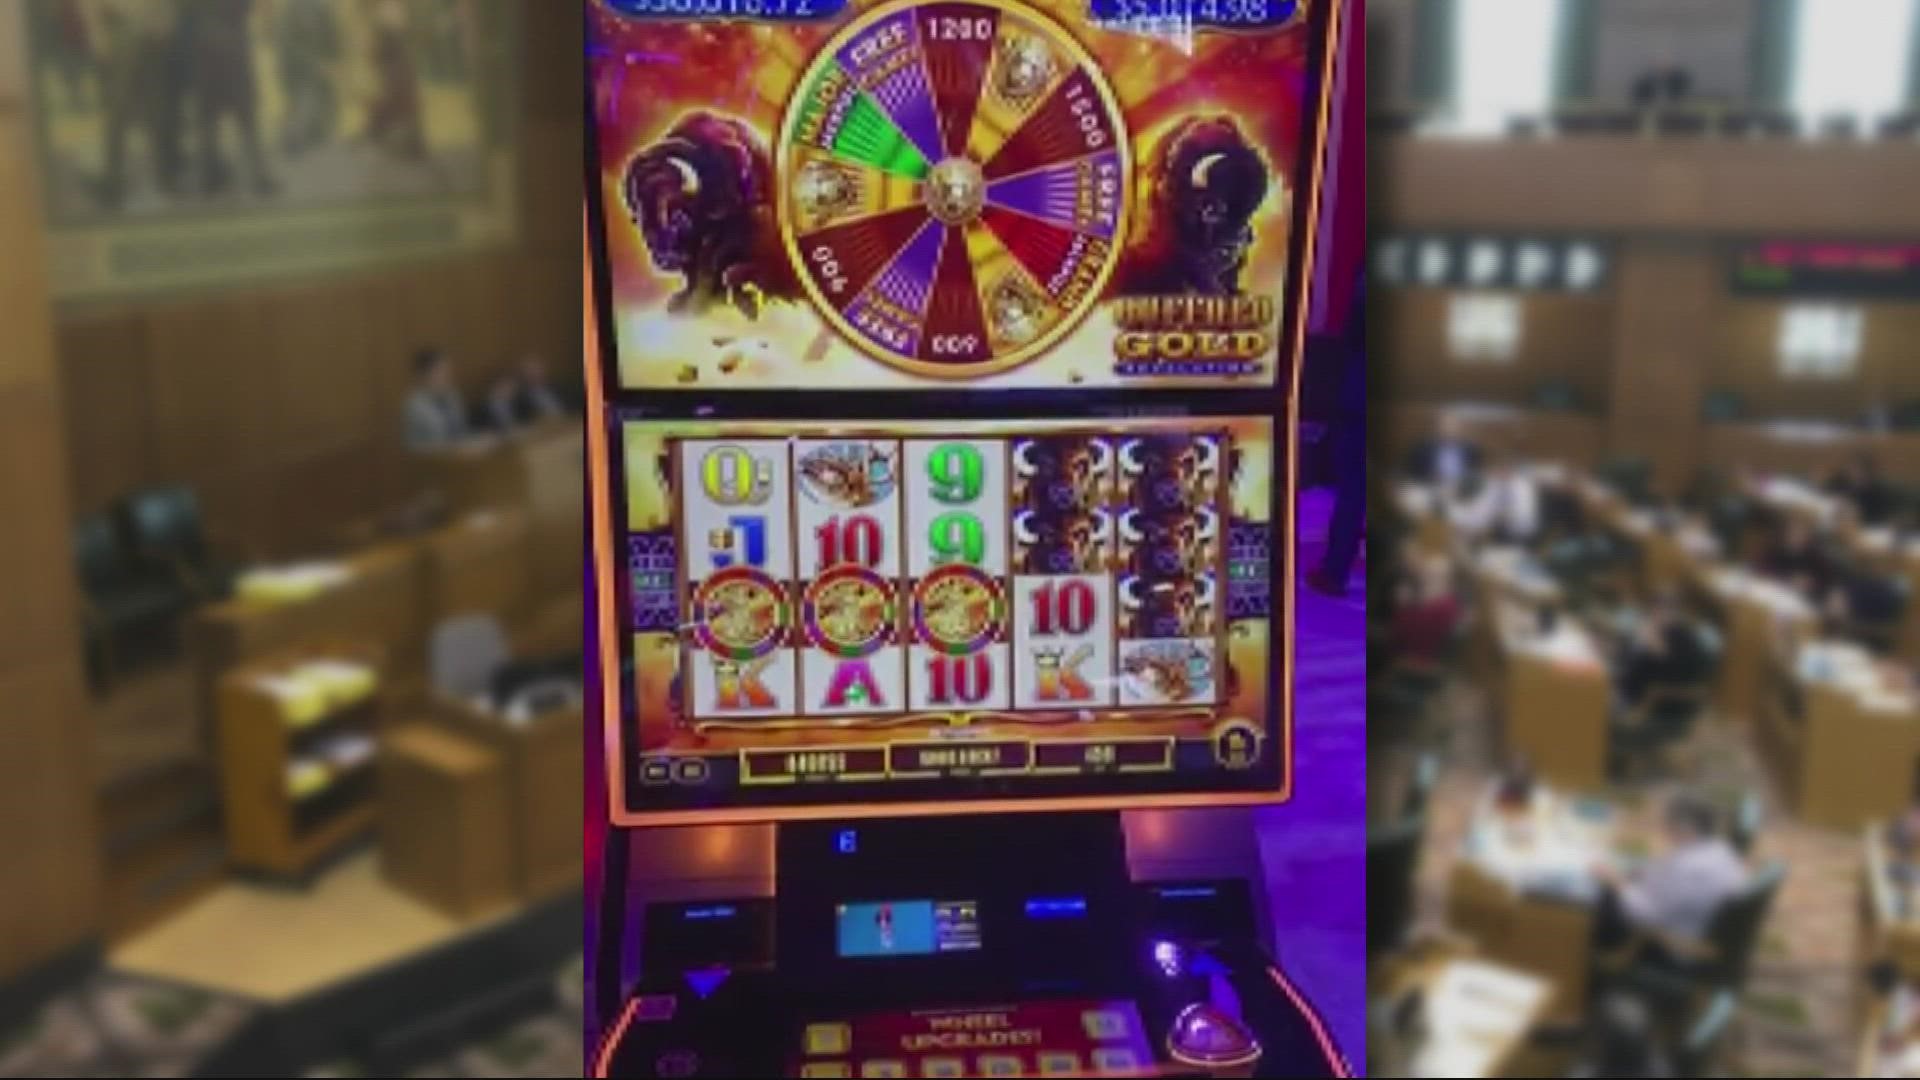 Some 200 jobs are on the line waiting for a decision from the state on the gaming machines.